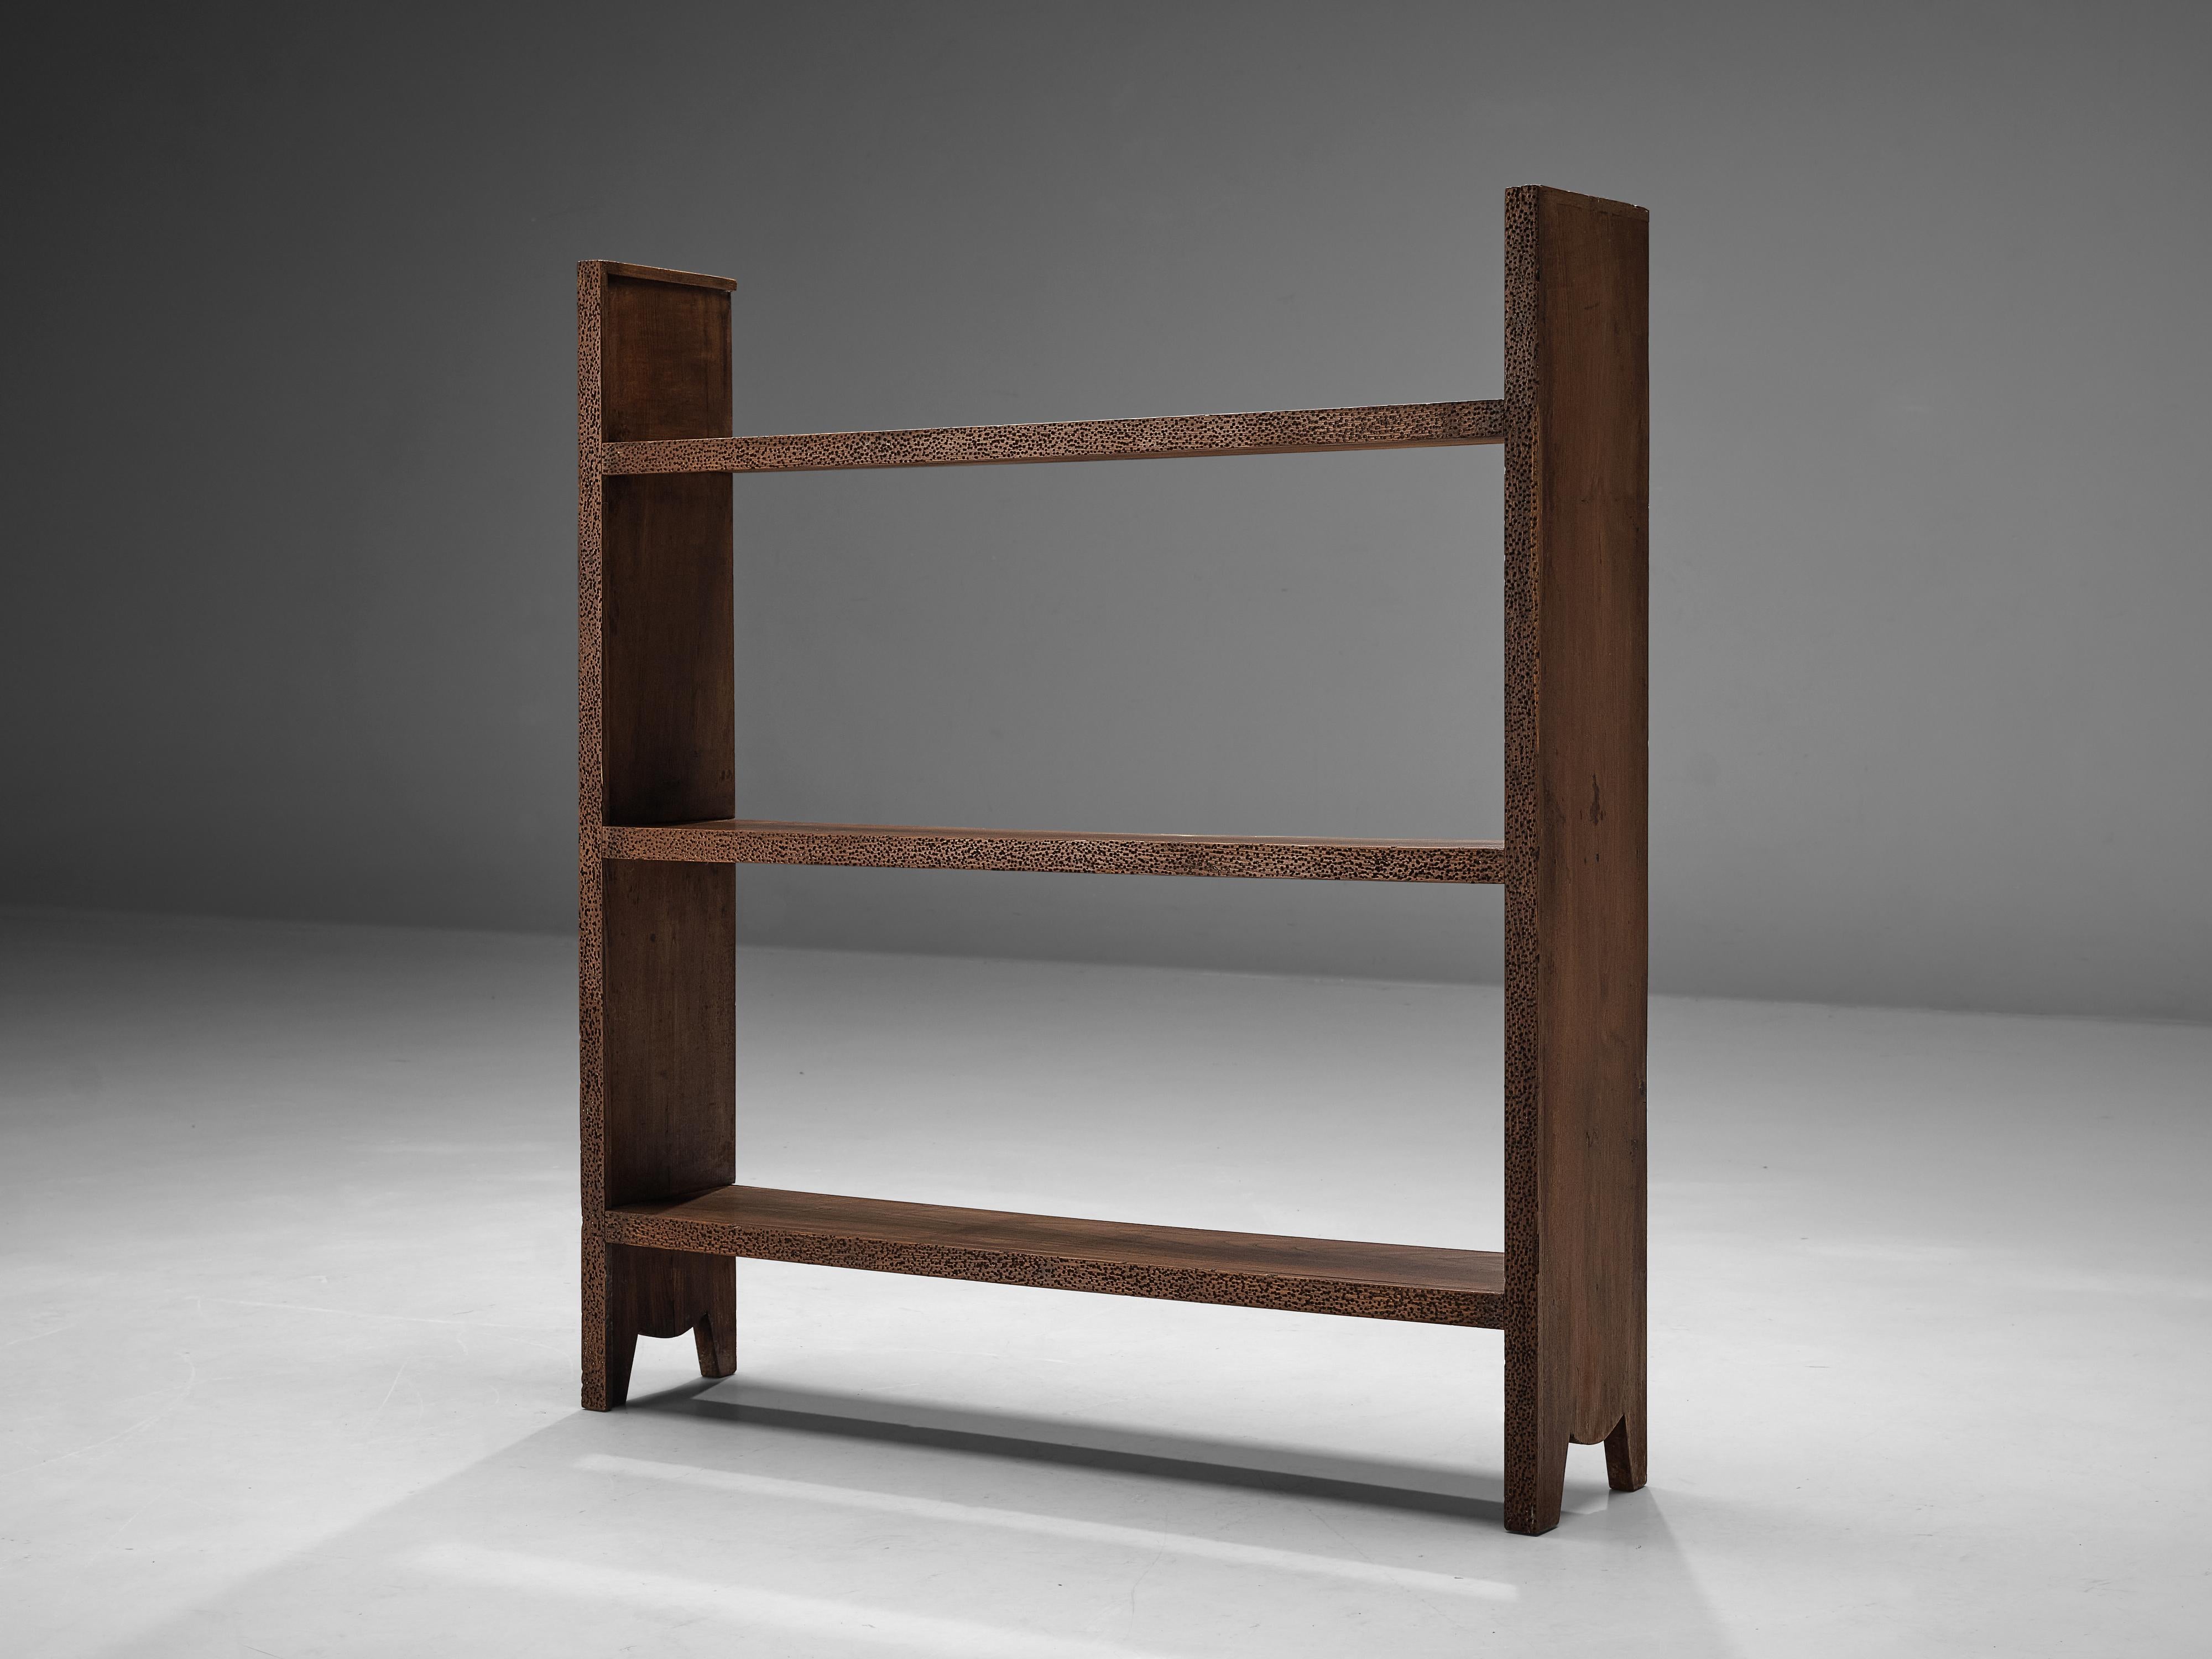 Ernesto Valabrega, bookcase, oak, Italy, 1930s

This bookcase shows the characteristics of Ernesto Valabrega's designs. The dynamic engraved wood, gives the piece real character. A nice detail are the small legs on each side of the shelves which